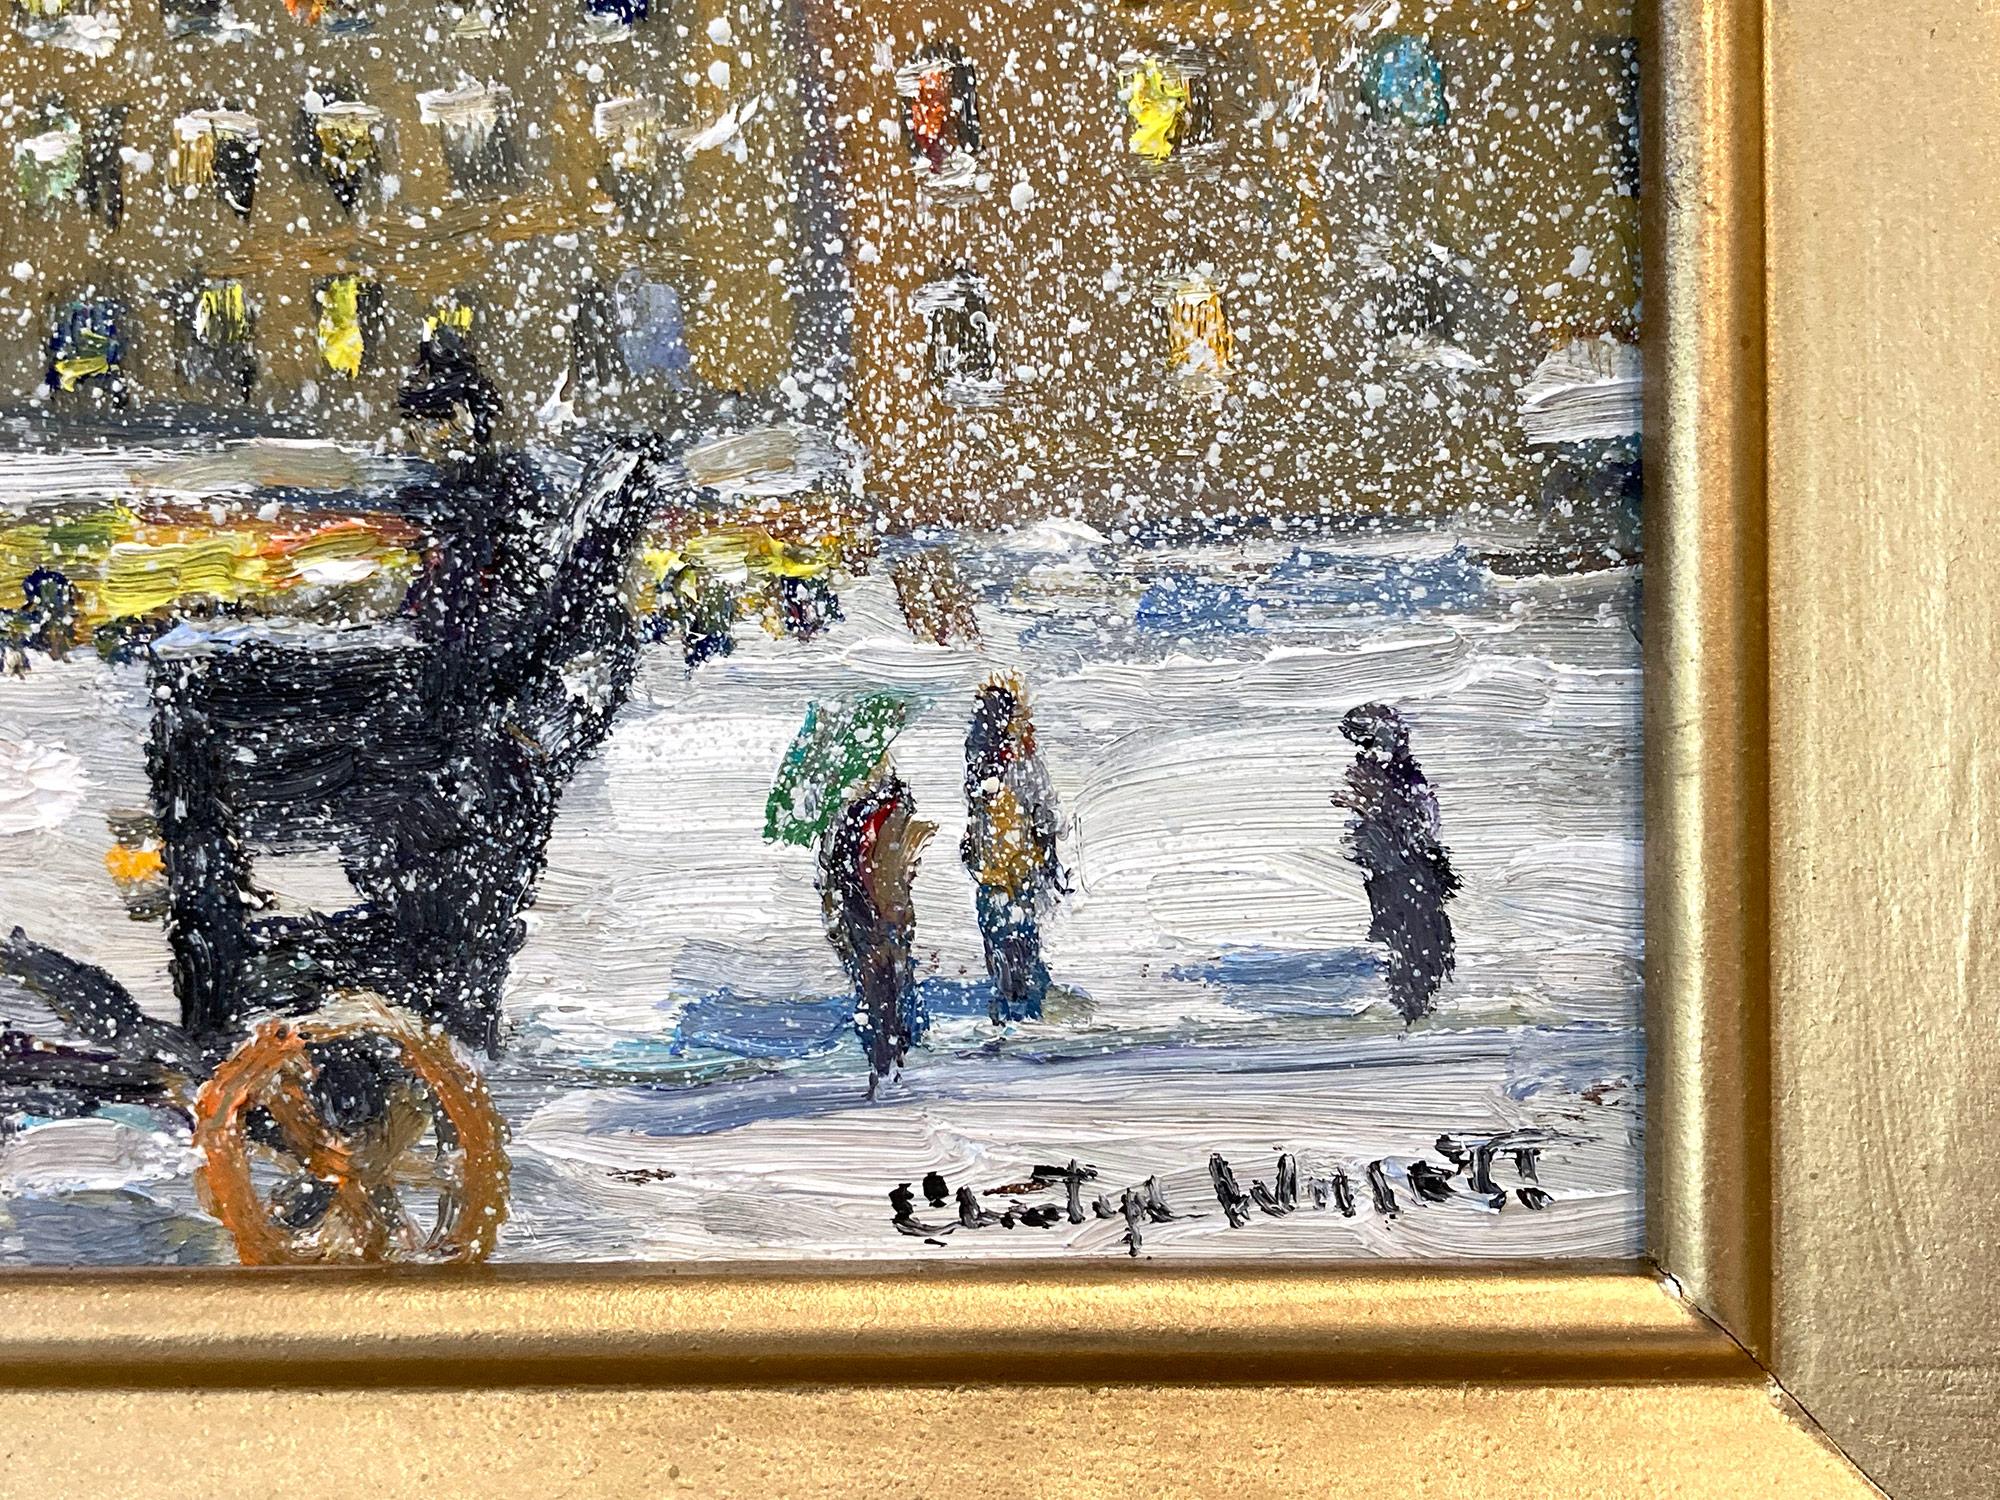 Impressionist New York City winter landscape scene depicting the City in Snow in a most intimate, yet energetic way. Christopher is known for capturing the beauty and simplicity of an earlier time of the 20th Century; old New York, families working